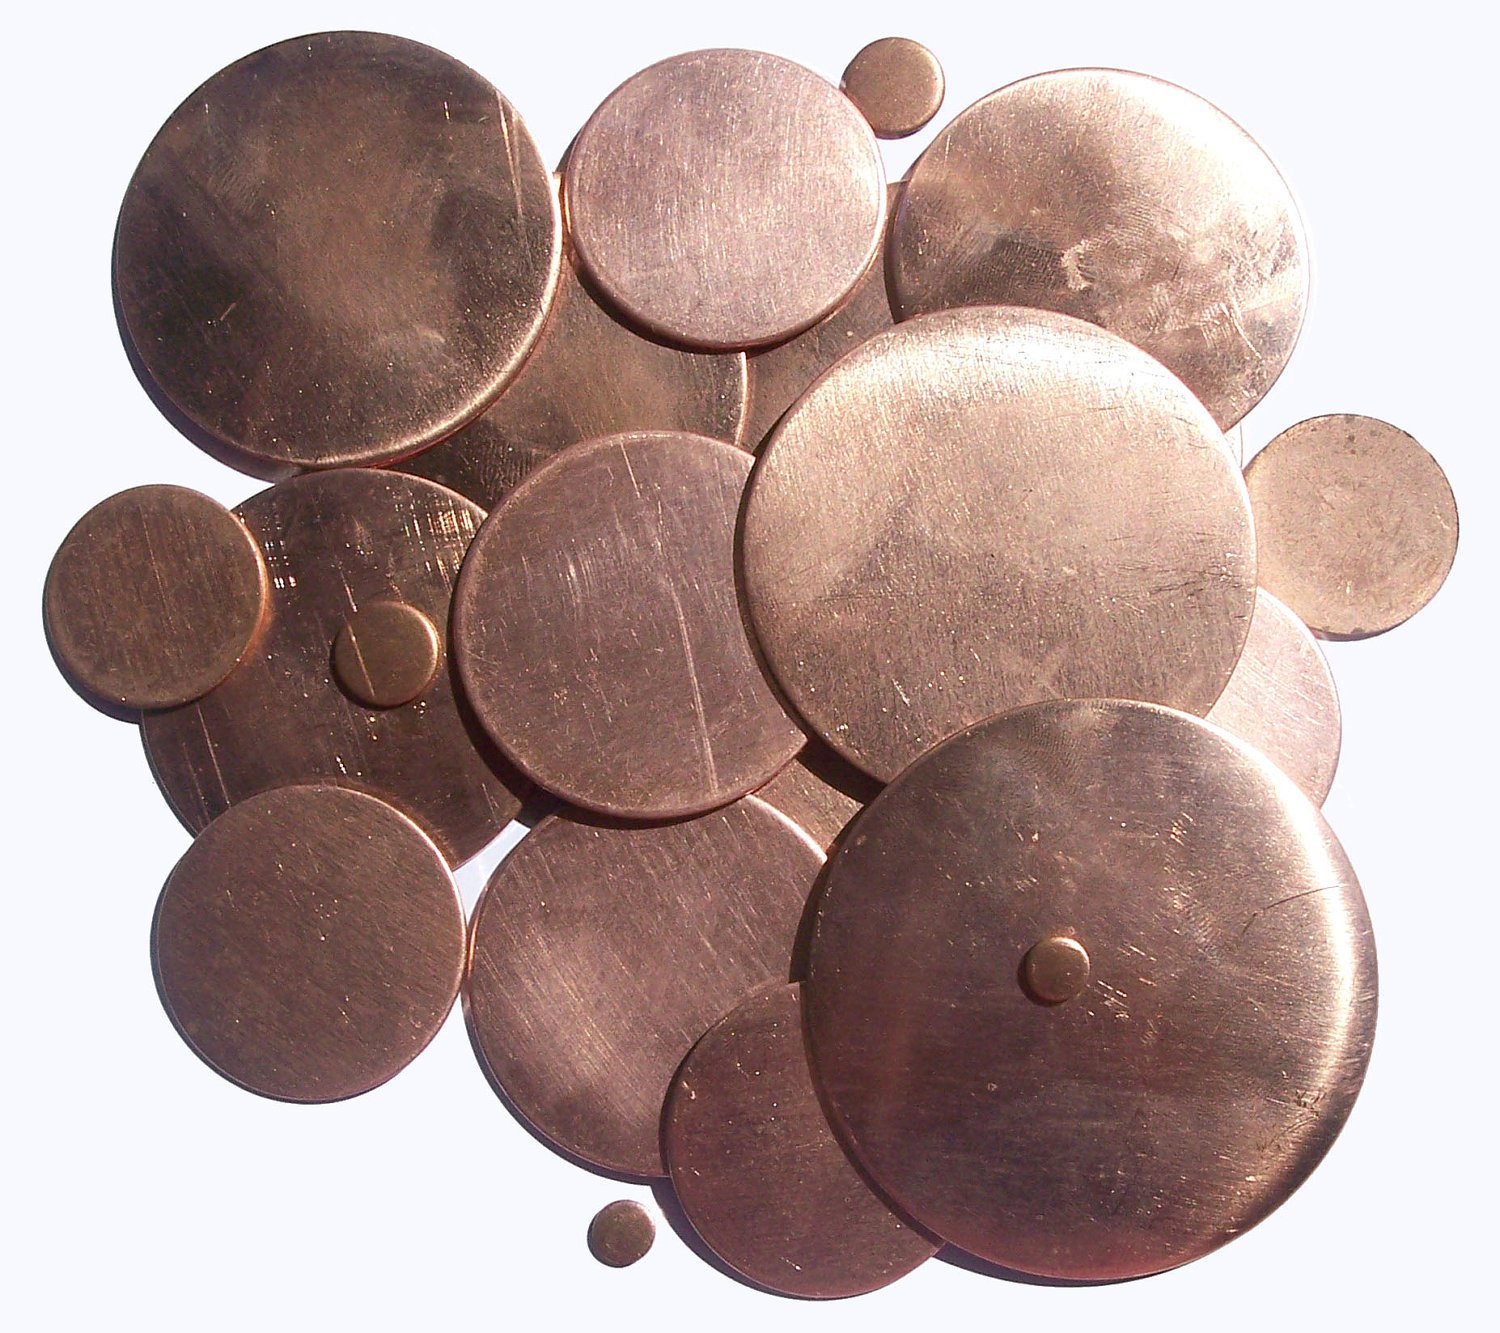 Round 42mm Blank 24G Enameling Stamping Texturing Metalworking Blank, Supplies - 3 Copper Pieces